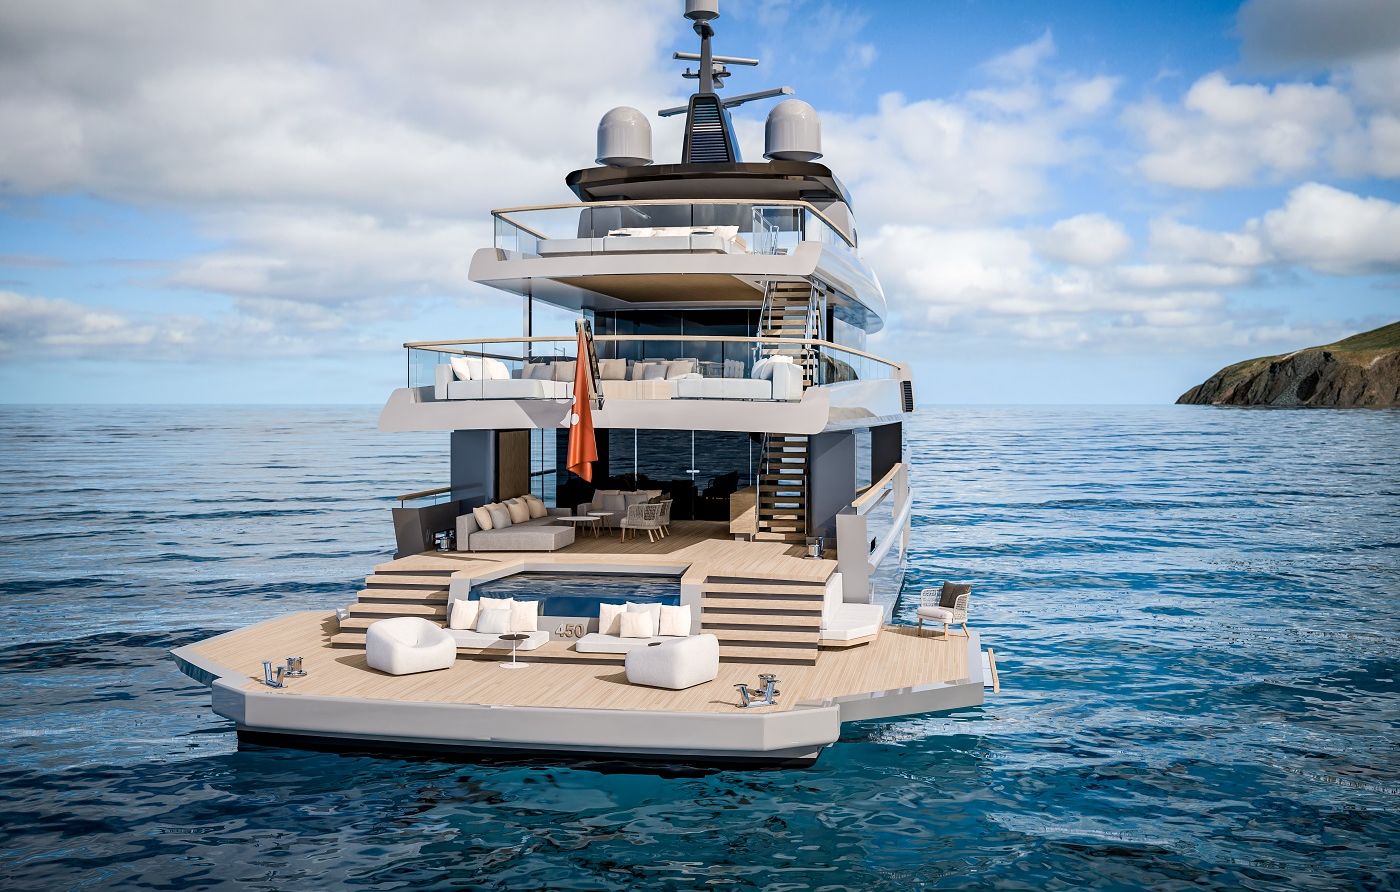 New build for Sale: The T450 by Tankoa Yachts